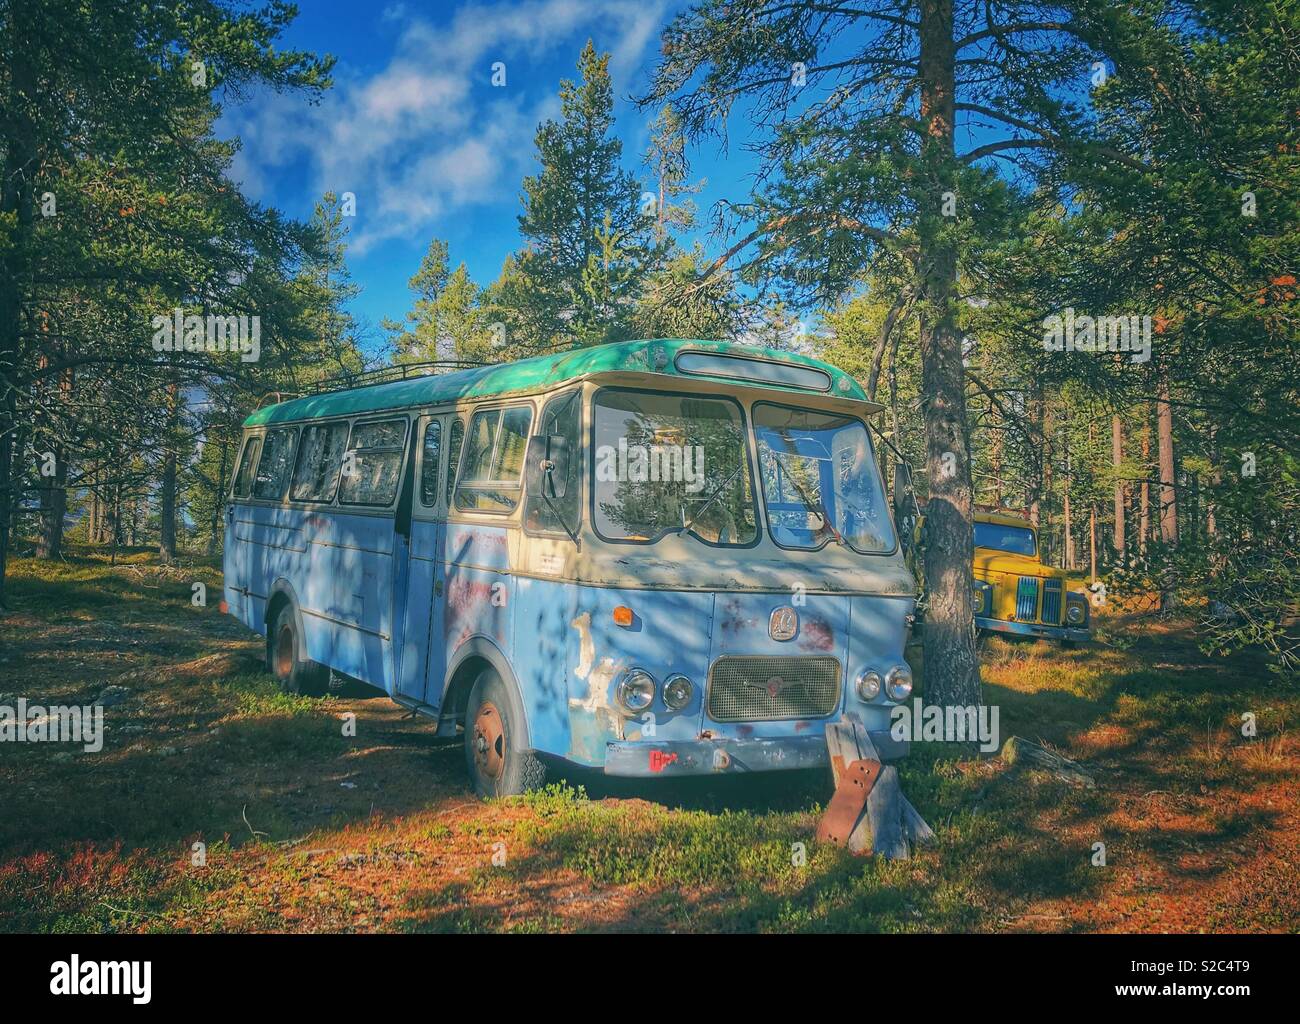 Old bus abandoned in the forest Stock Photo